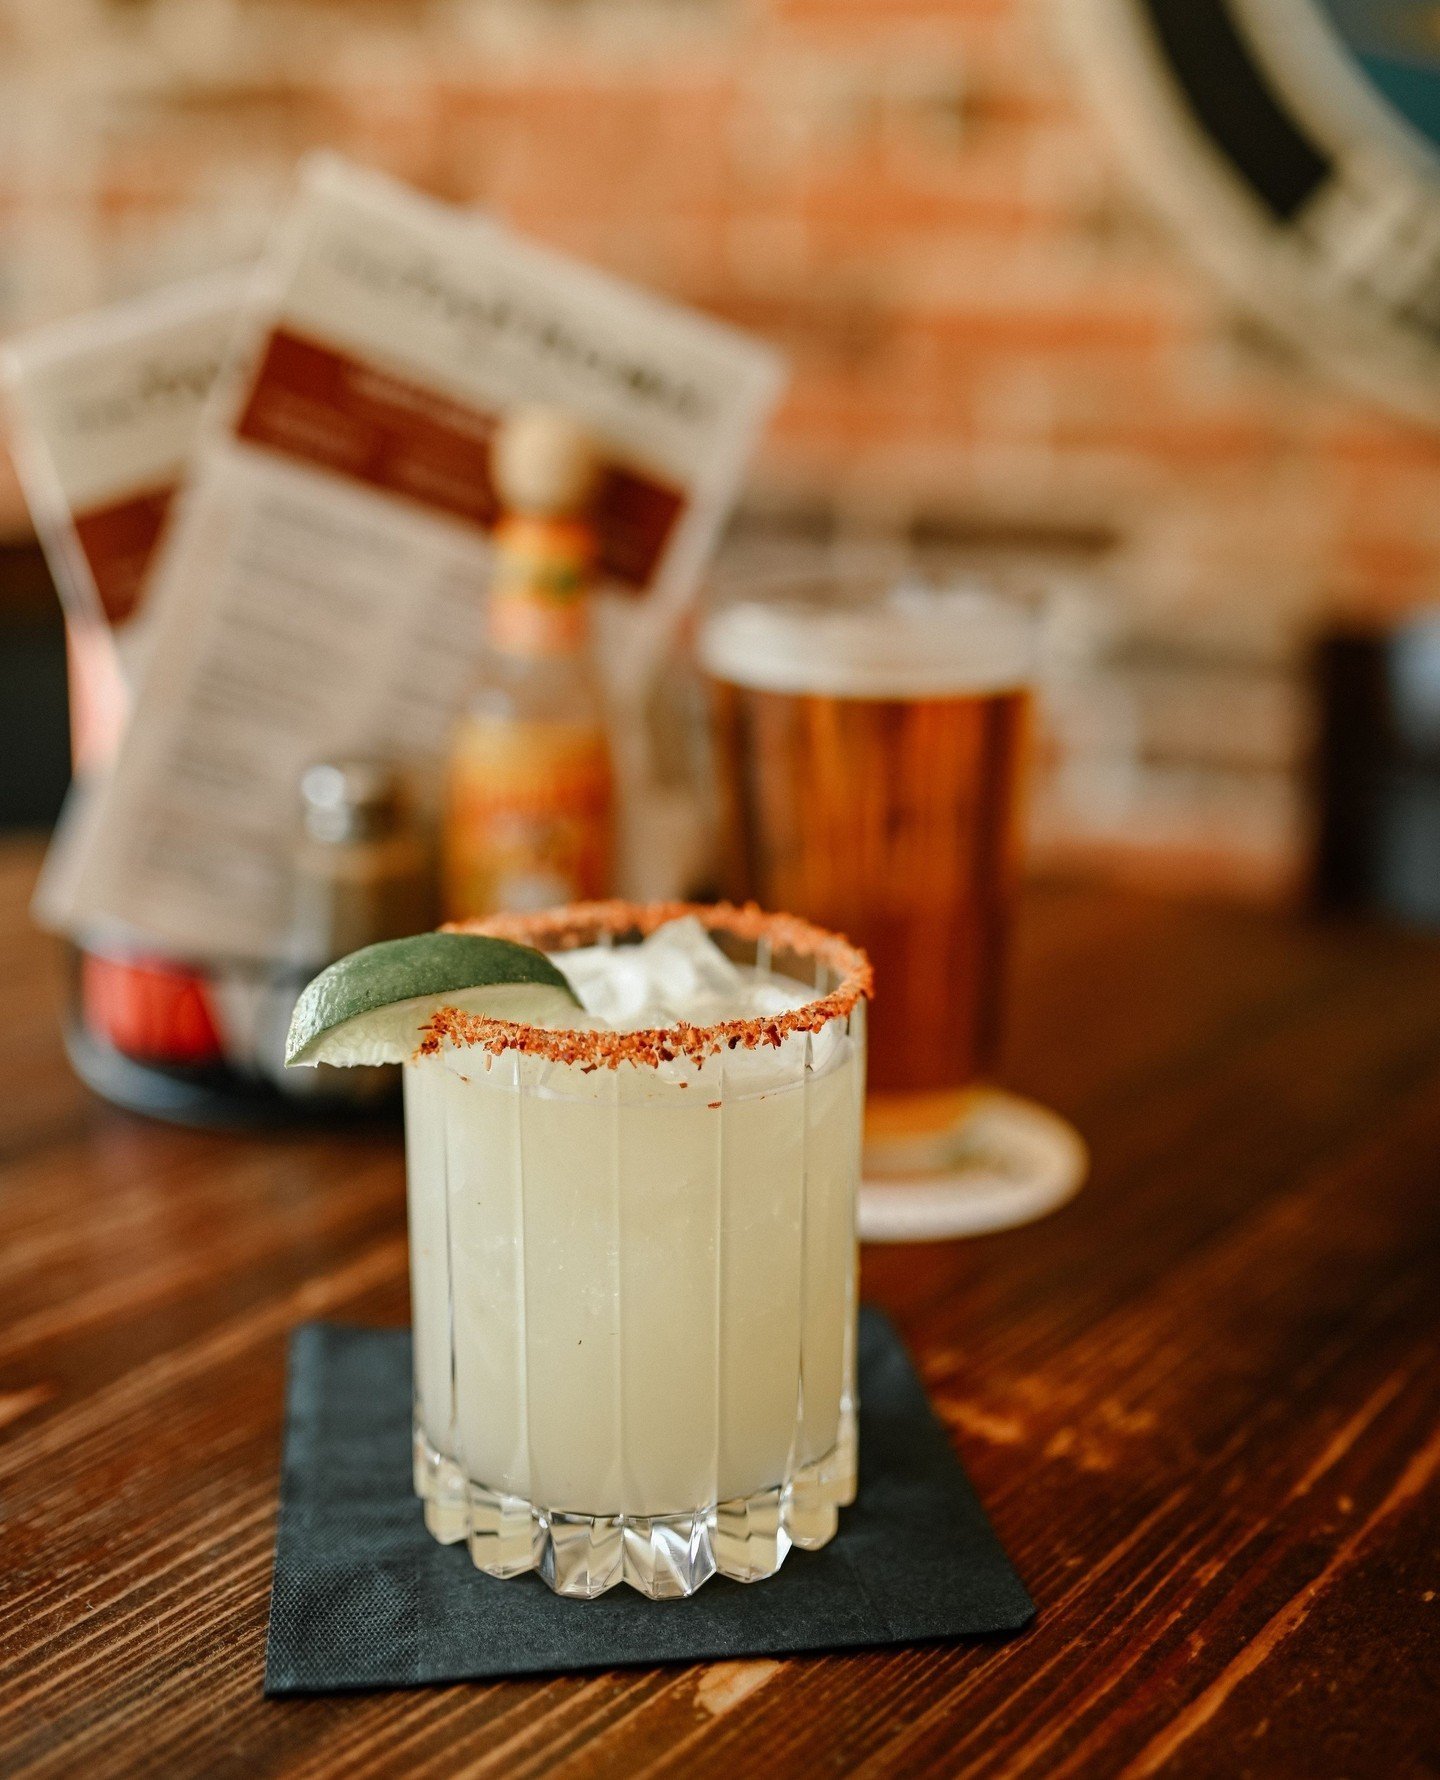 Tequila, please! Happy Cinco de Mayo! ⁠
⁠
Come enjoy a Tapalach Margarita (or two!) featuring Tanteo Jalapeno Tequila, Gran-Gala, and House-made Sour 🍹🌶️⁠
⁠
⁠
#apalachicola #forgottencoast #visitapalachicola #visitflorida #lovefl #stgeorgeisland #p